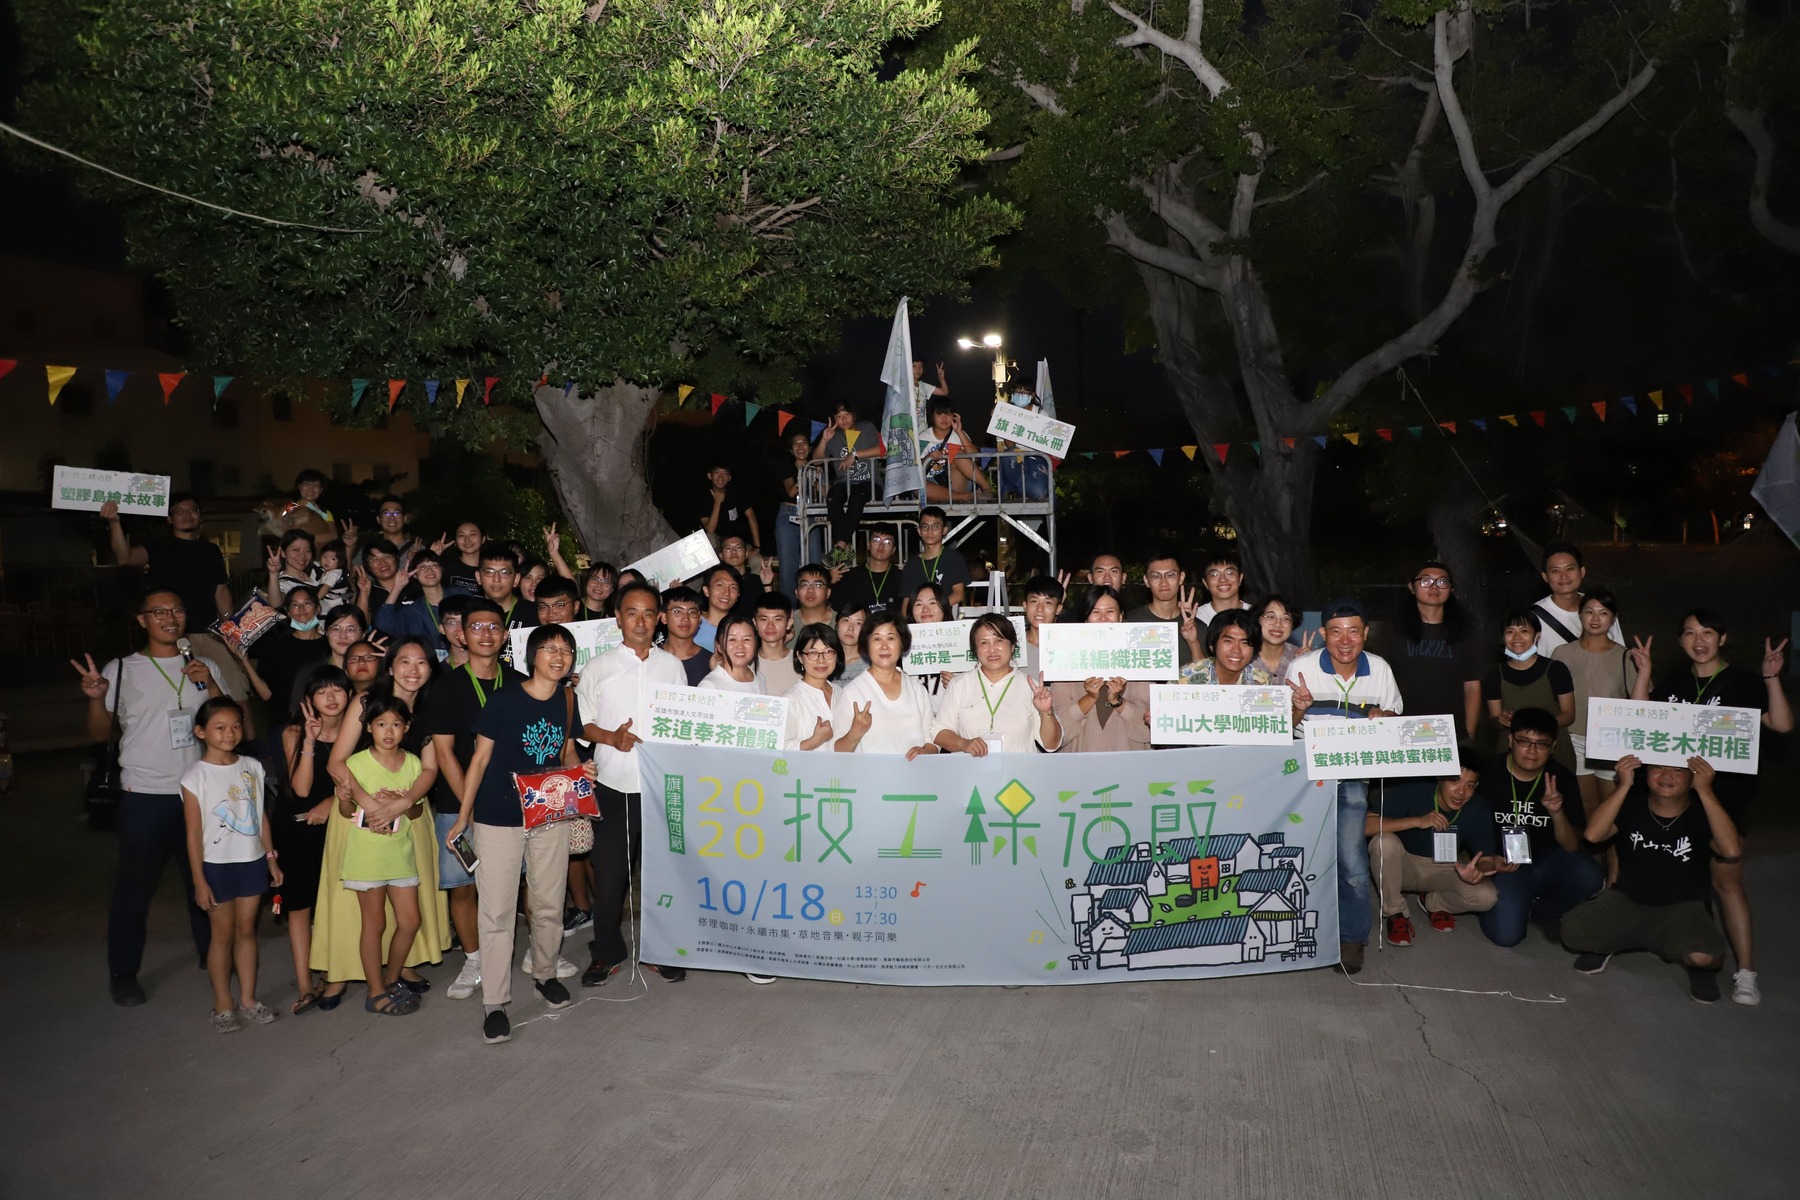 "USR Project: The City as a Commuseum – Socially Embedded Community Engagement – Community Practice Embedded in Social Textures" of the Department of Sociology organized the 2021 Cijin Circular Economy & Green Life Festival focusing on local culture and pro-environmental activities.